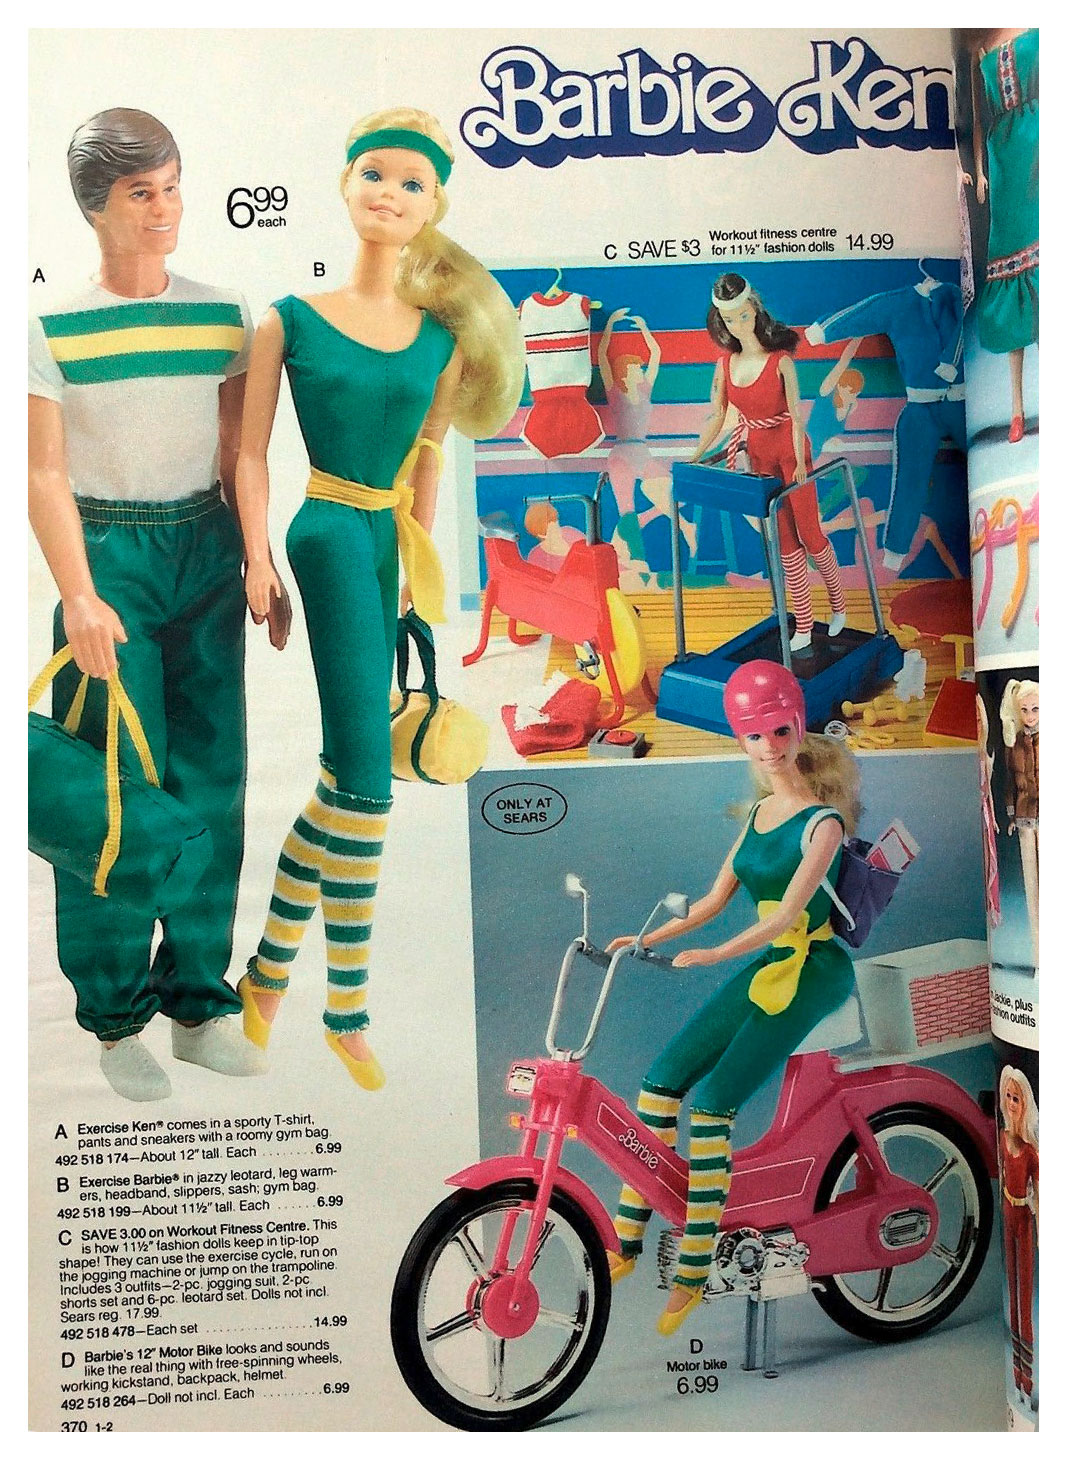 From 1985 Canadian Sears Christmas catalogue